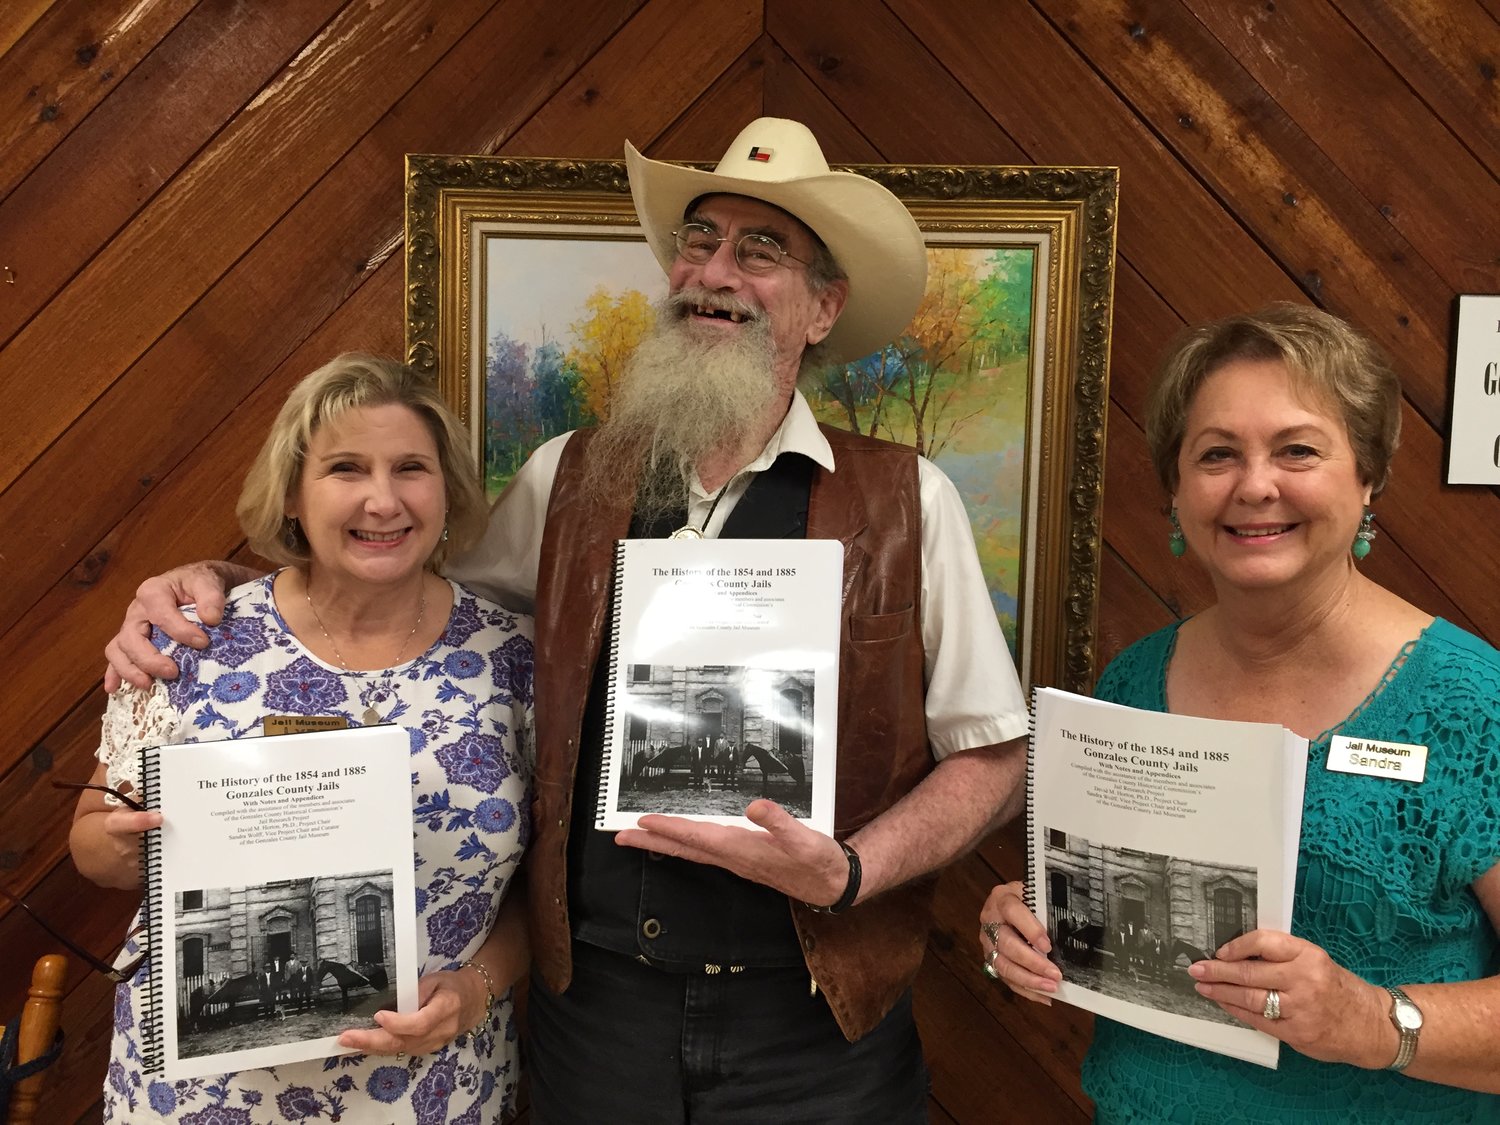 A collaborative effort four years in the making, “The History of the 1854 and 1885 Gonzales County Jails” details both sides of life inside the former Gonzales County jails.